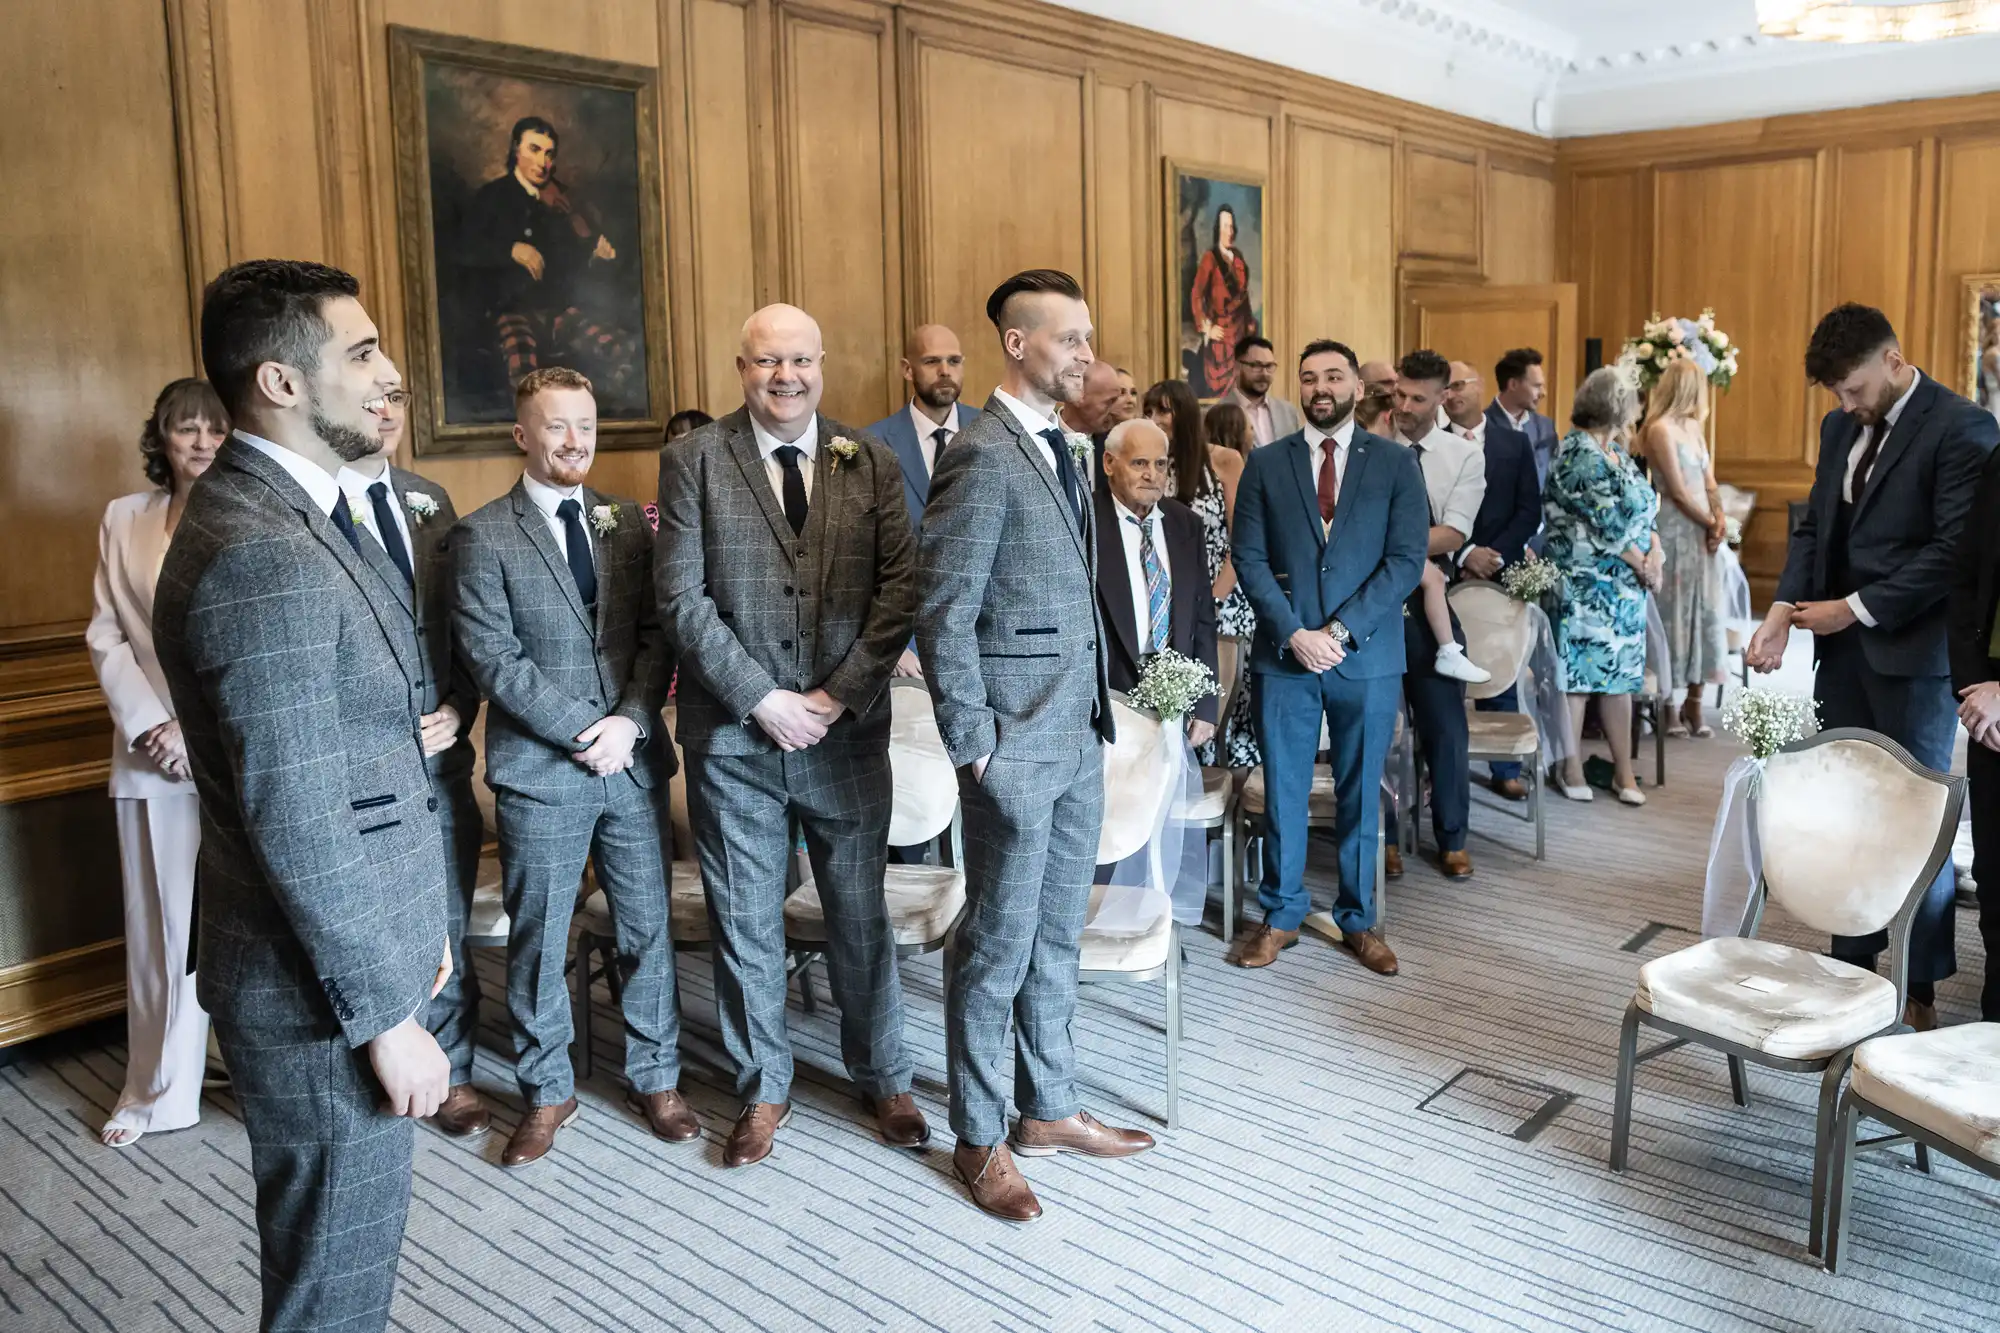 A wedding ceremony in a decorated room with guests and groomsmen standing as a groom awaits at the front.